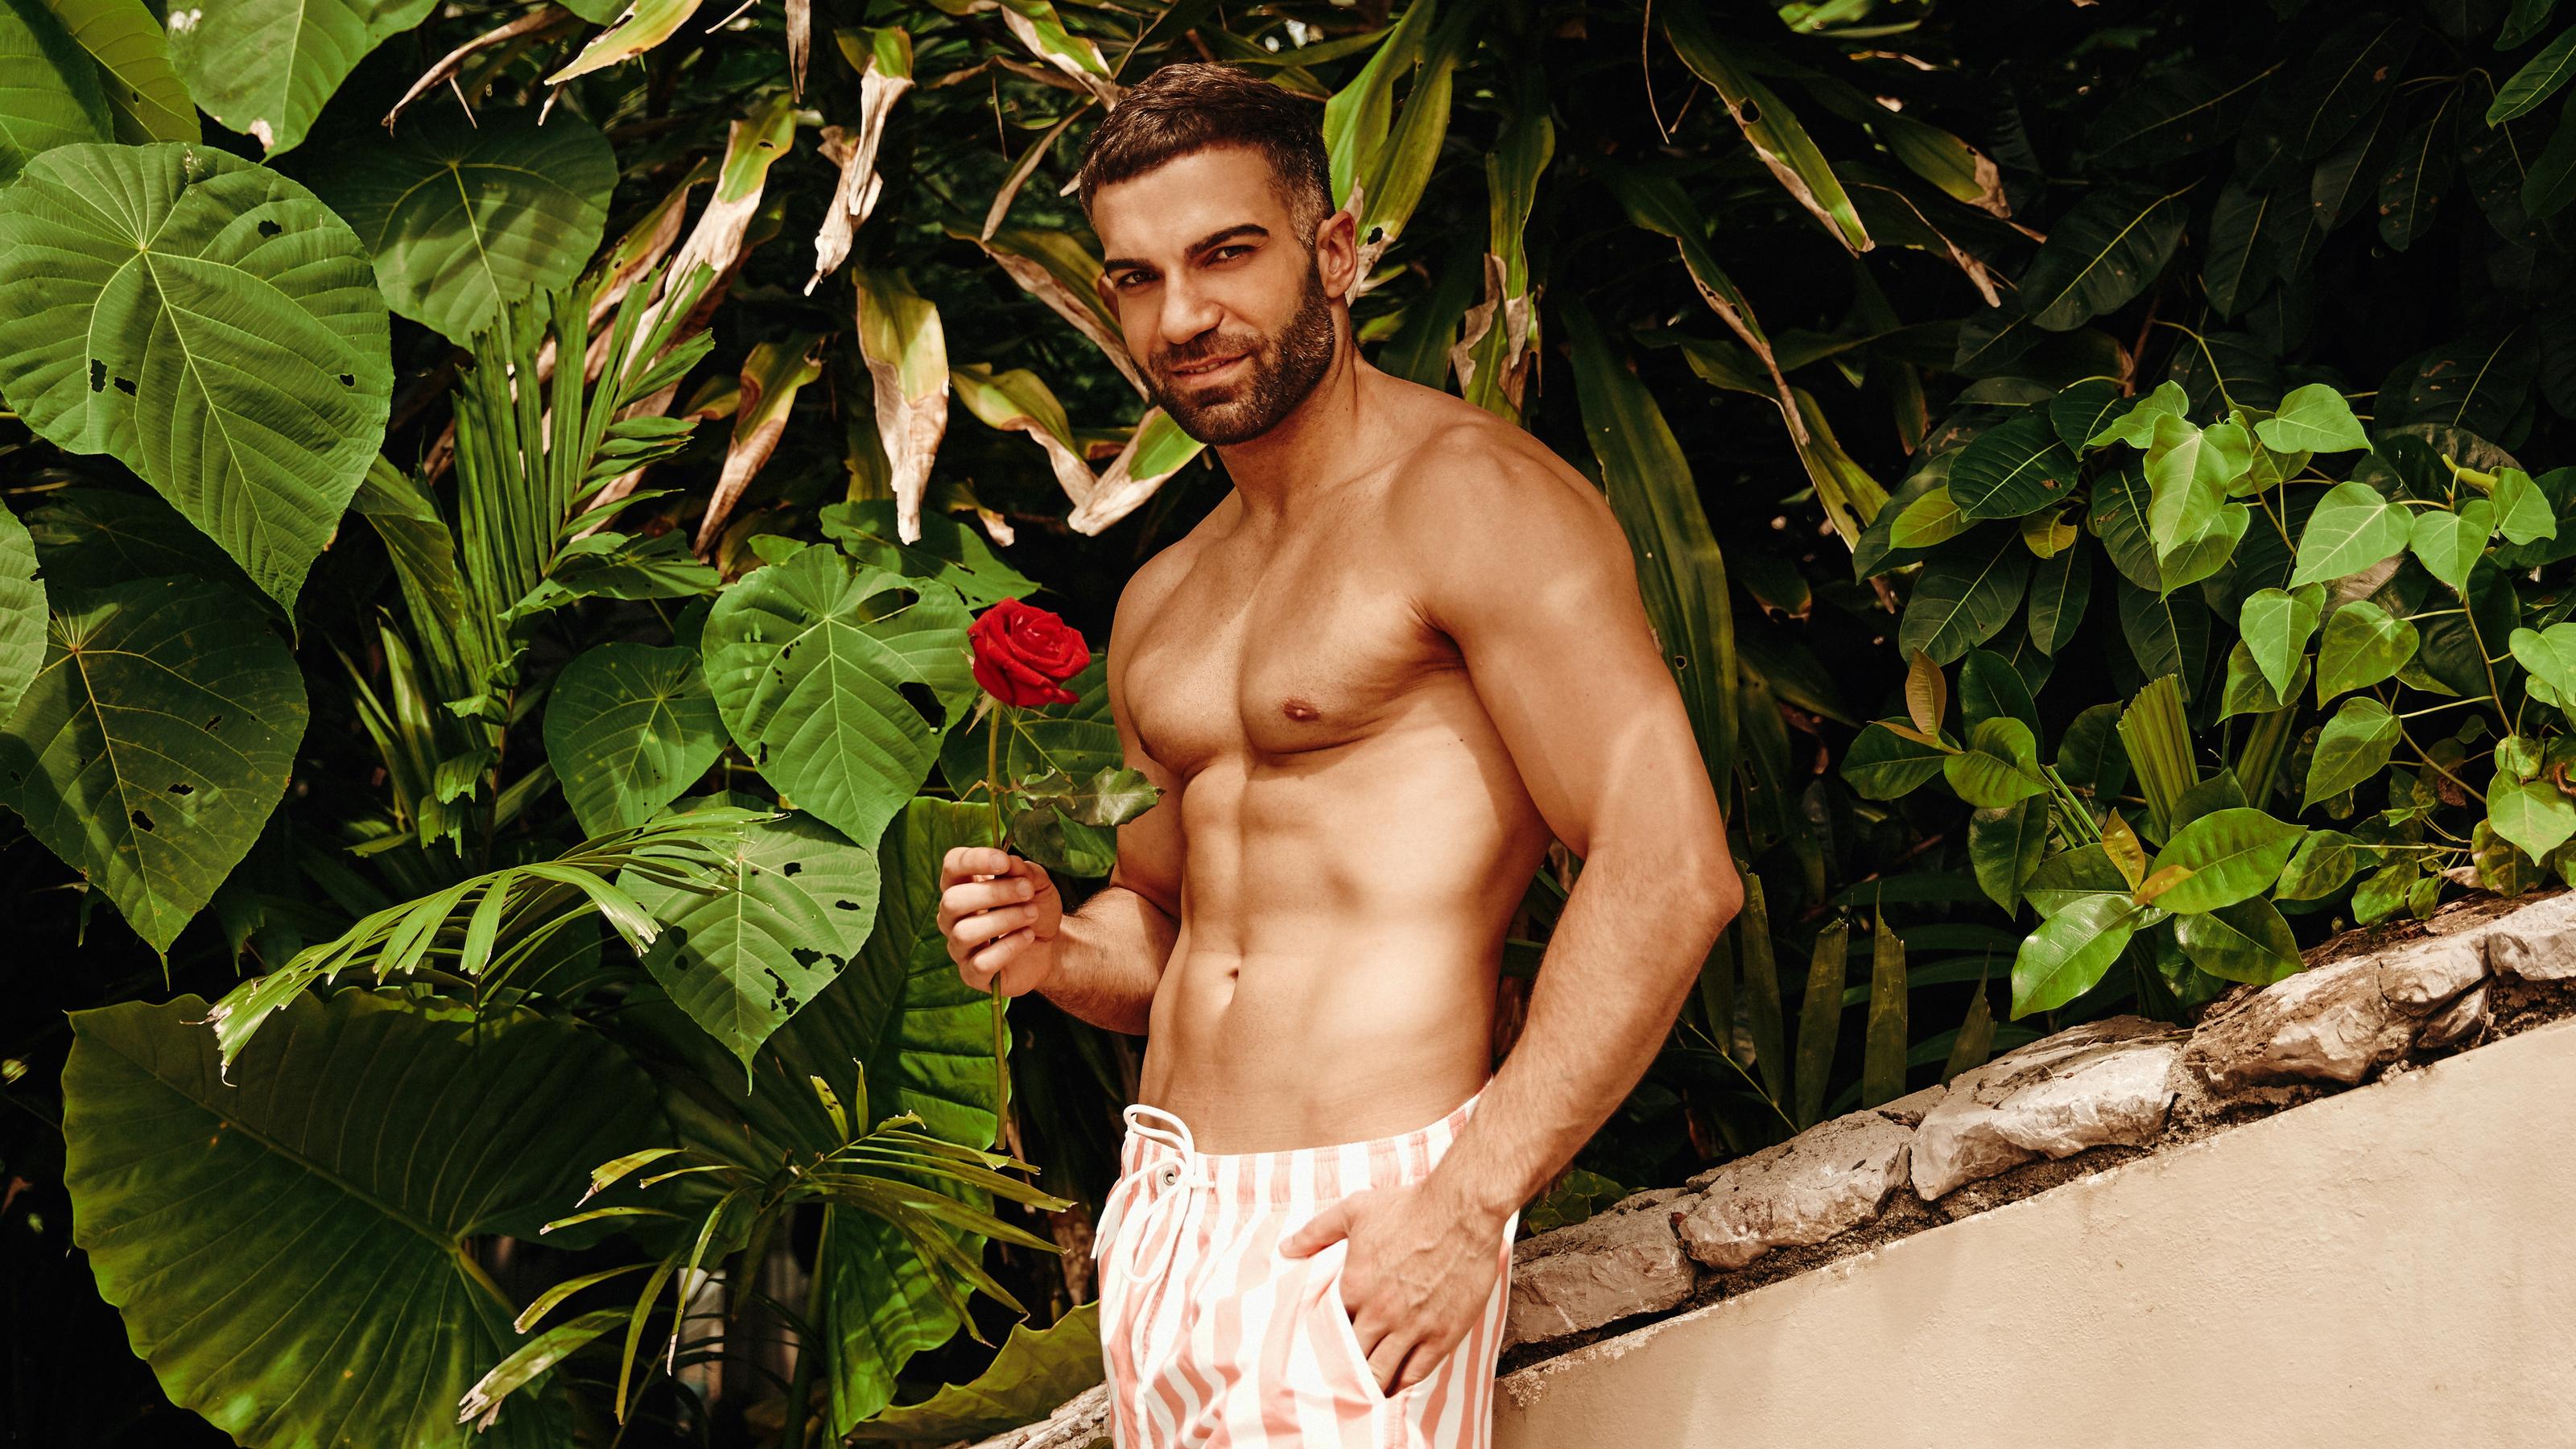 Rafi ist Kandidat bei "Bachelor in Paradise" 2019.